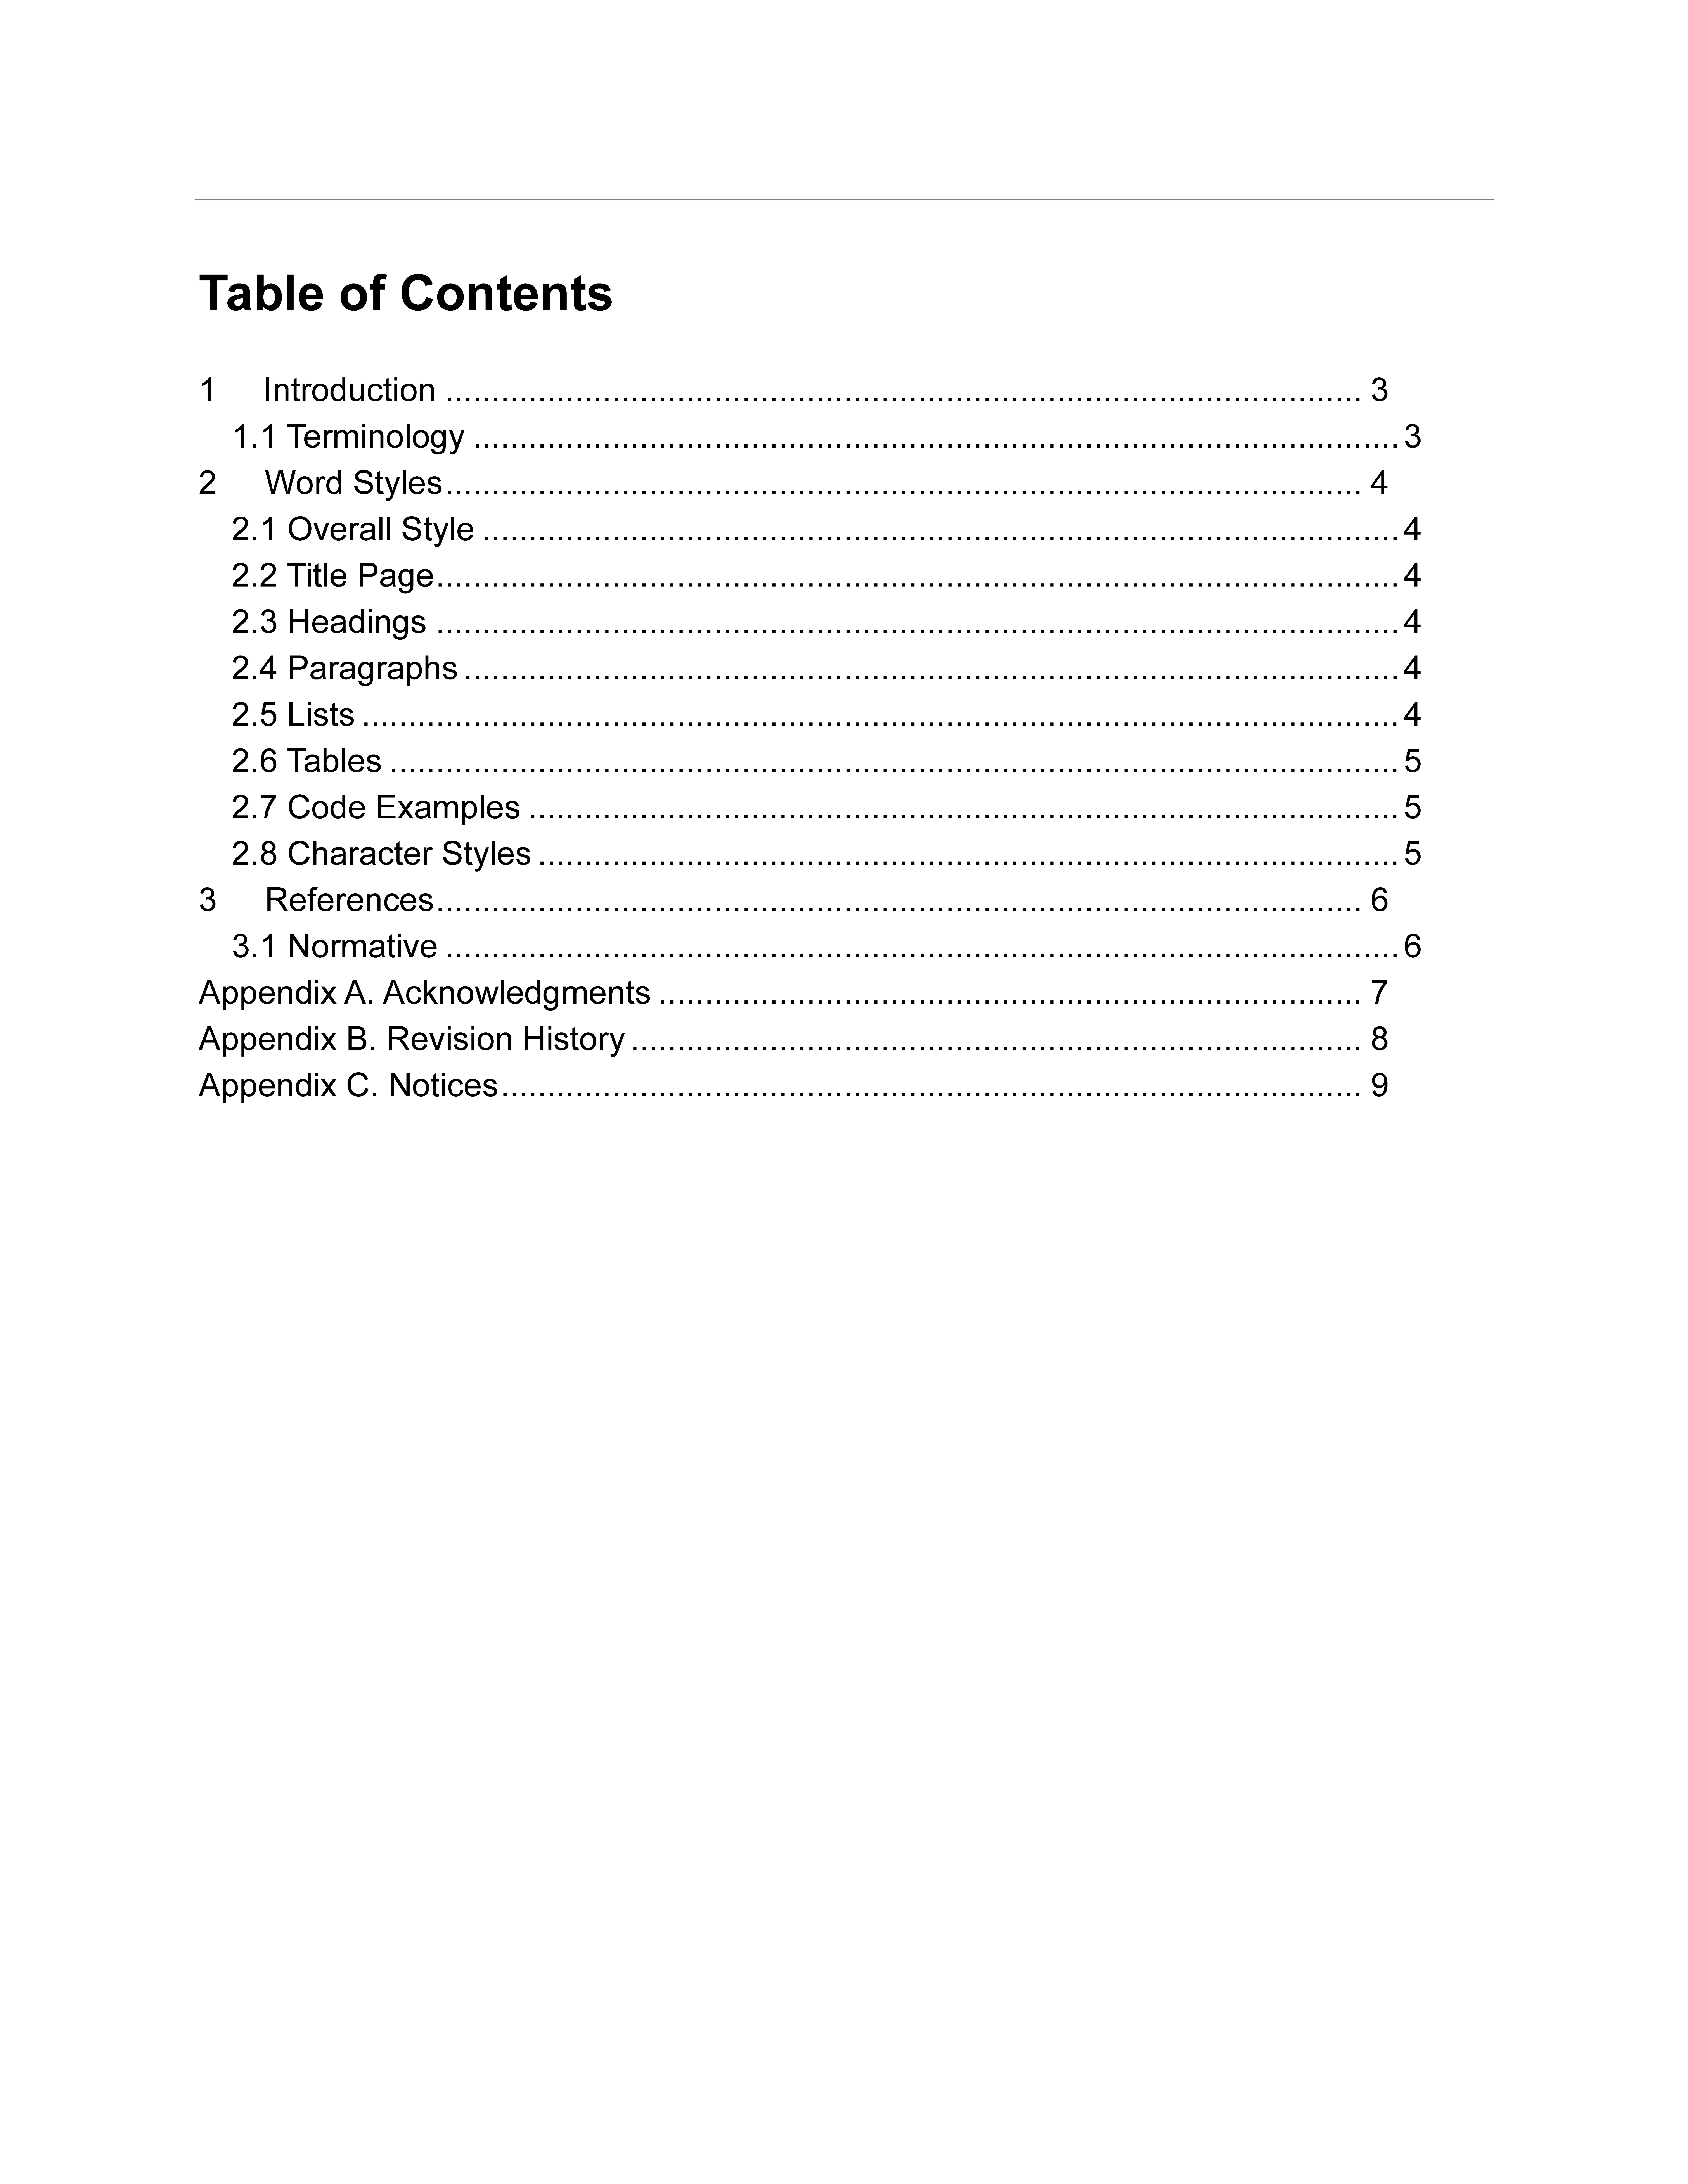 Table of Contents sample main image